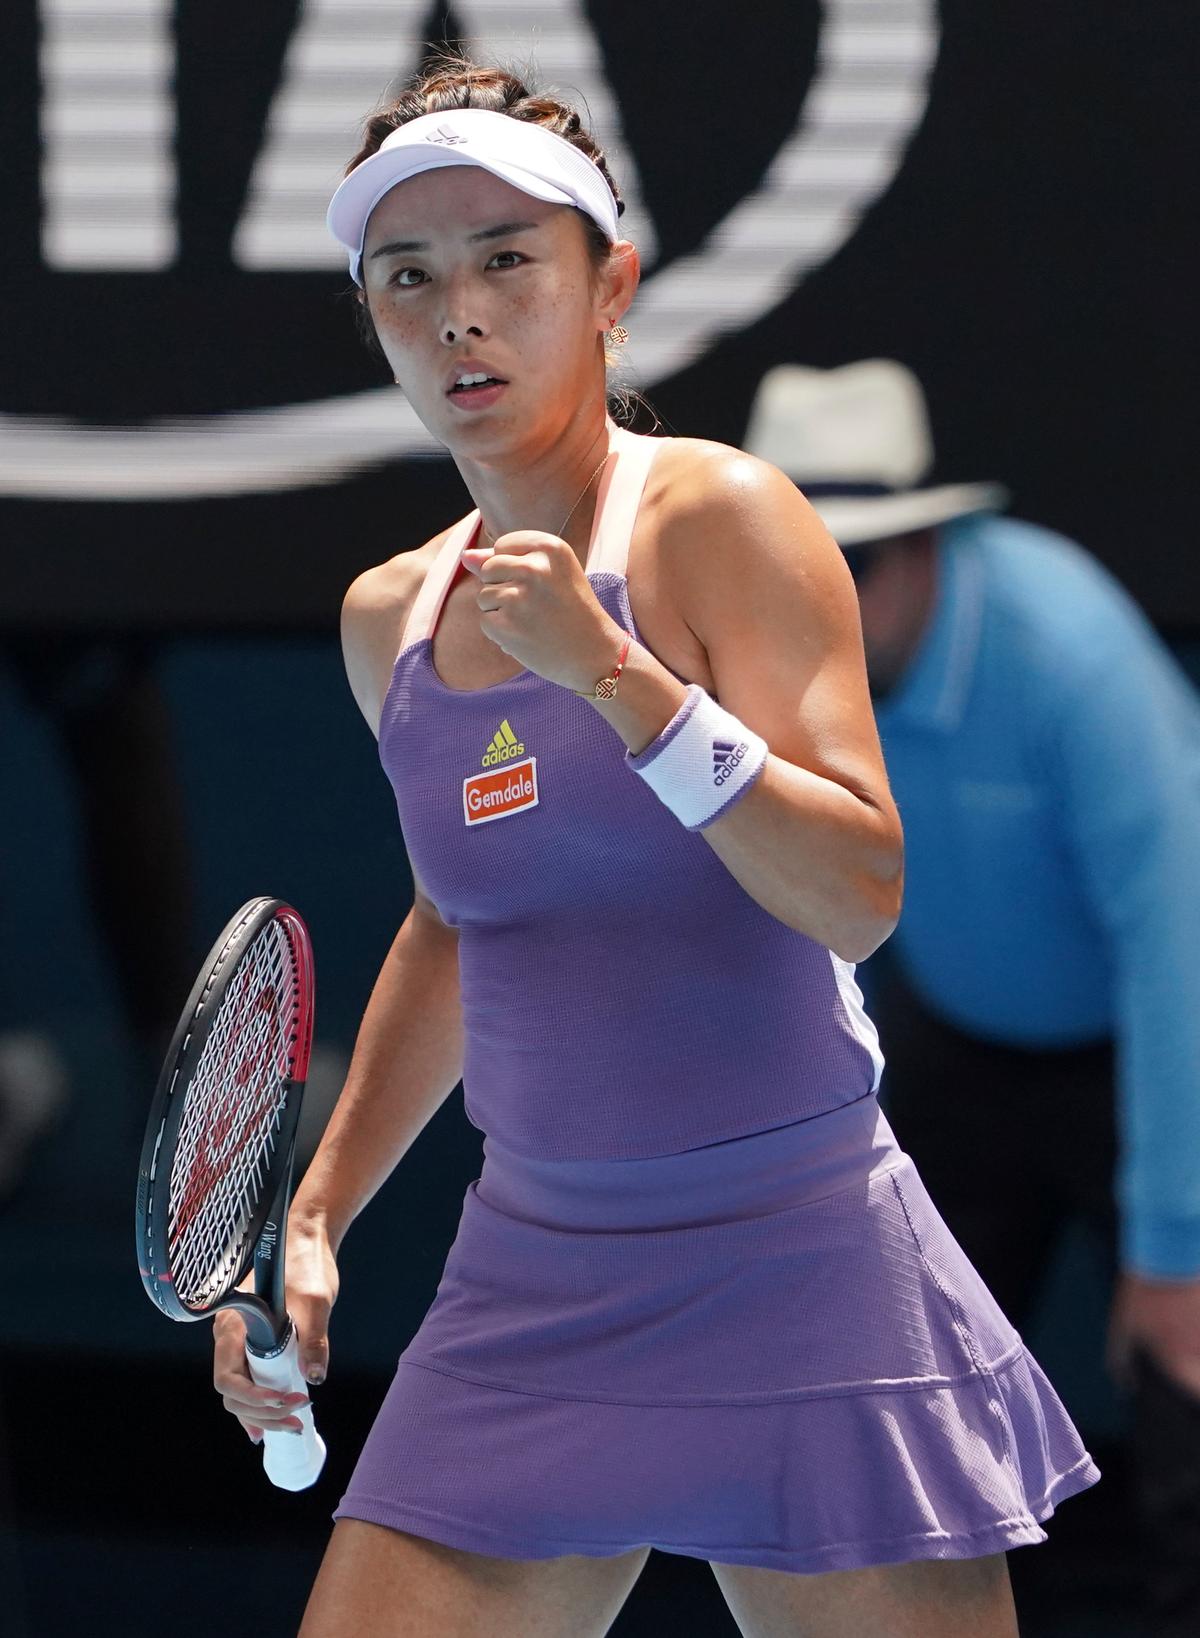 China's Wang Qiang reacts as she plays against Serena Williams of the U.S. in their third round singles match at the Australian Open tennis championship in Melbourne, Australia, Friday, Jan. 24, 2020. (AP Photo/Lee Jin-man)